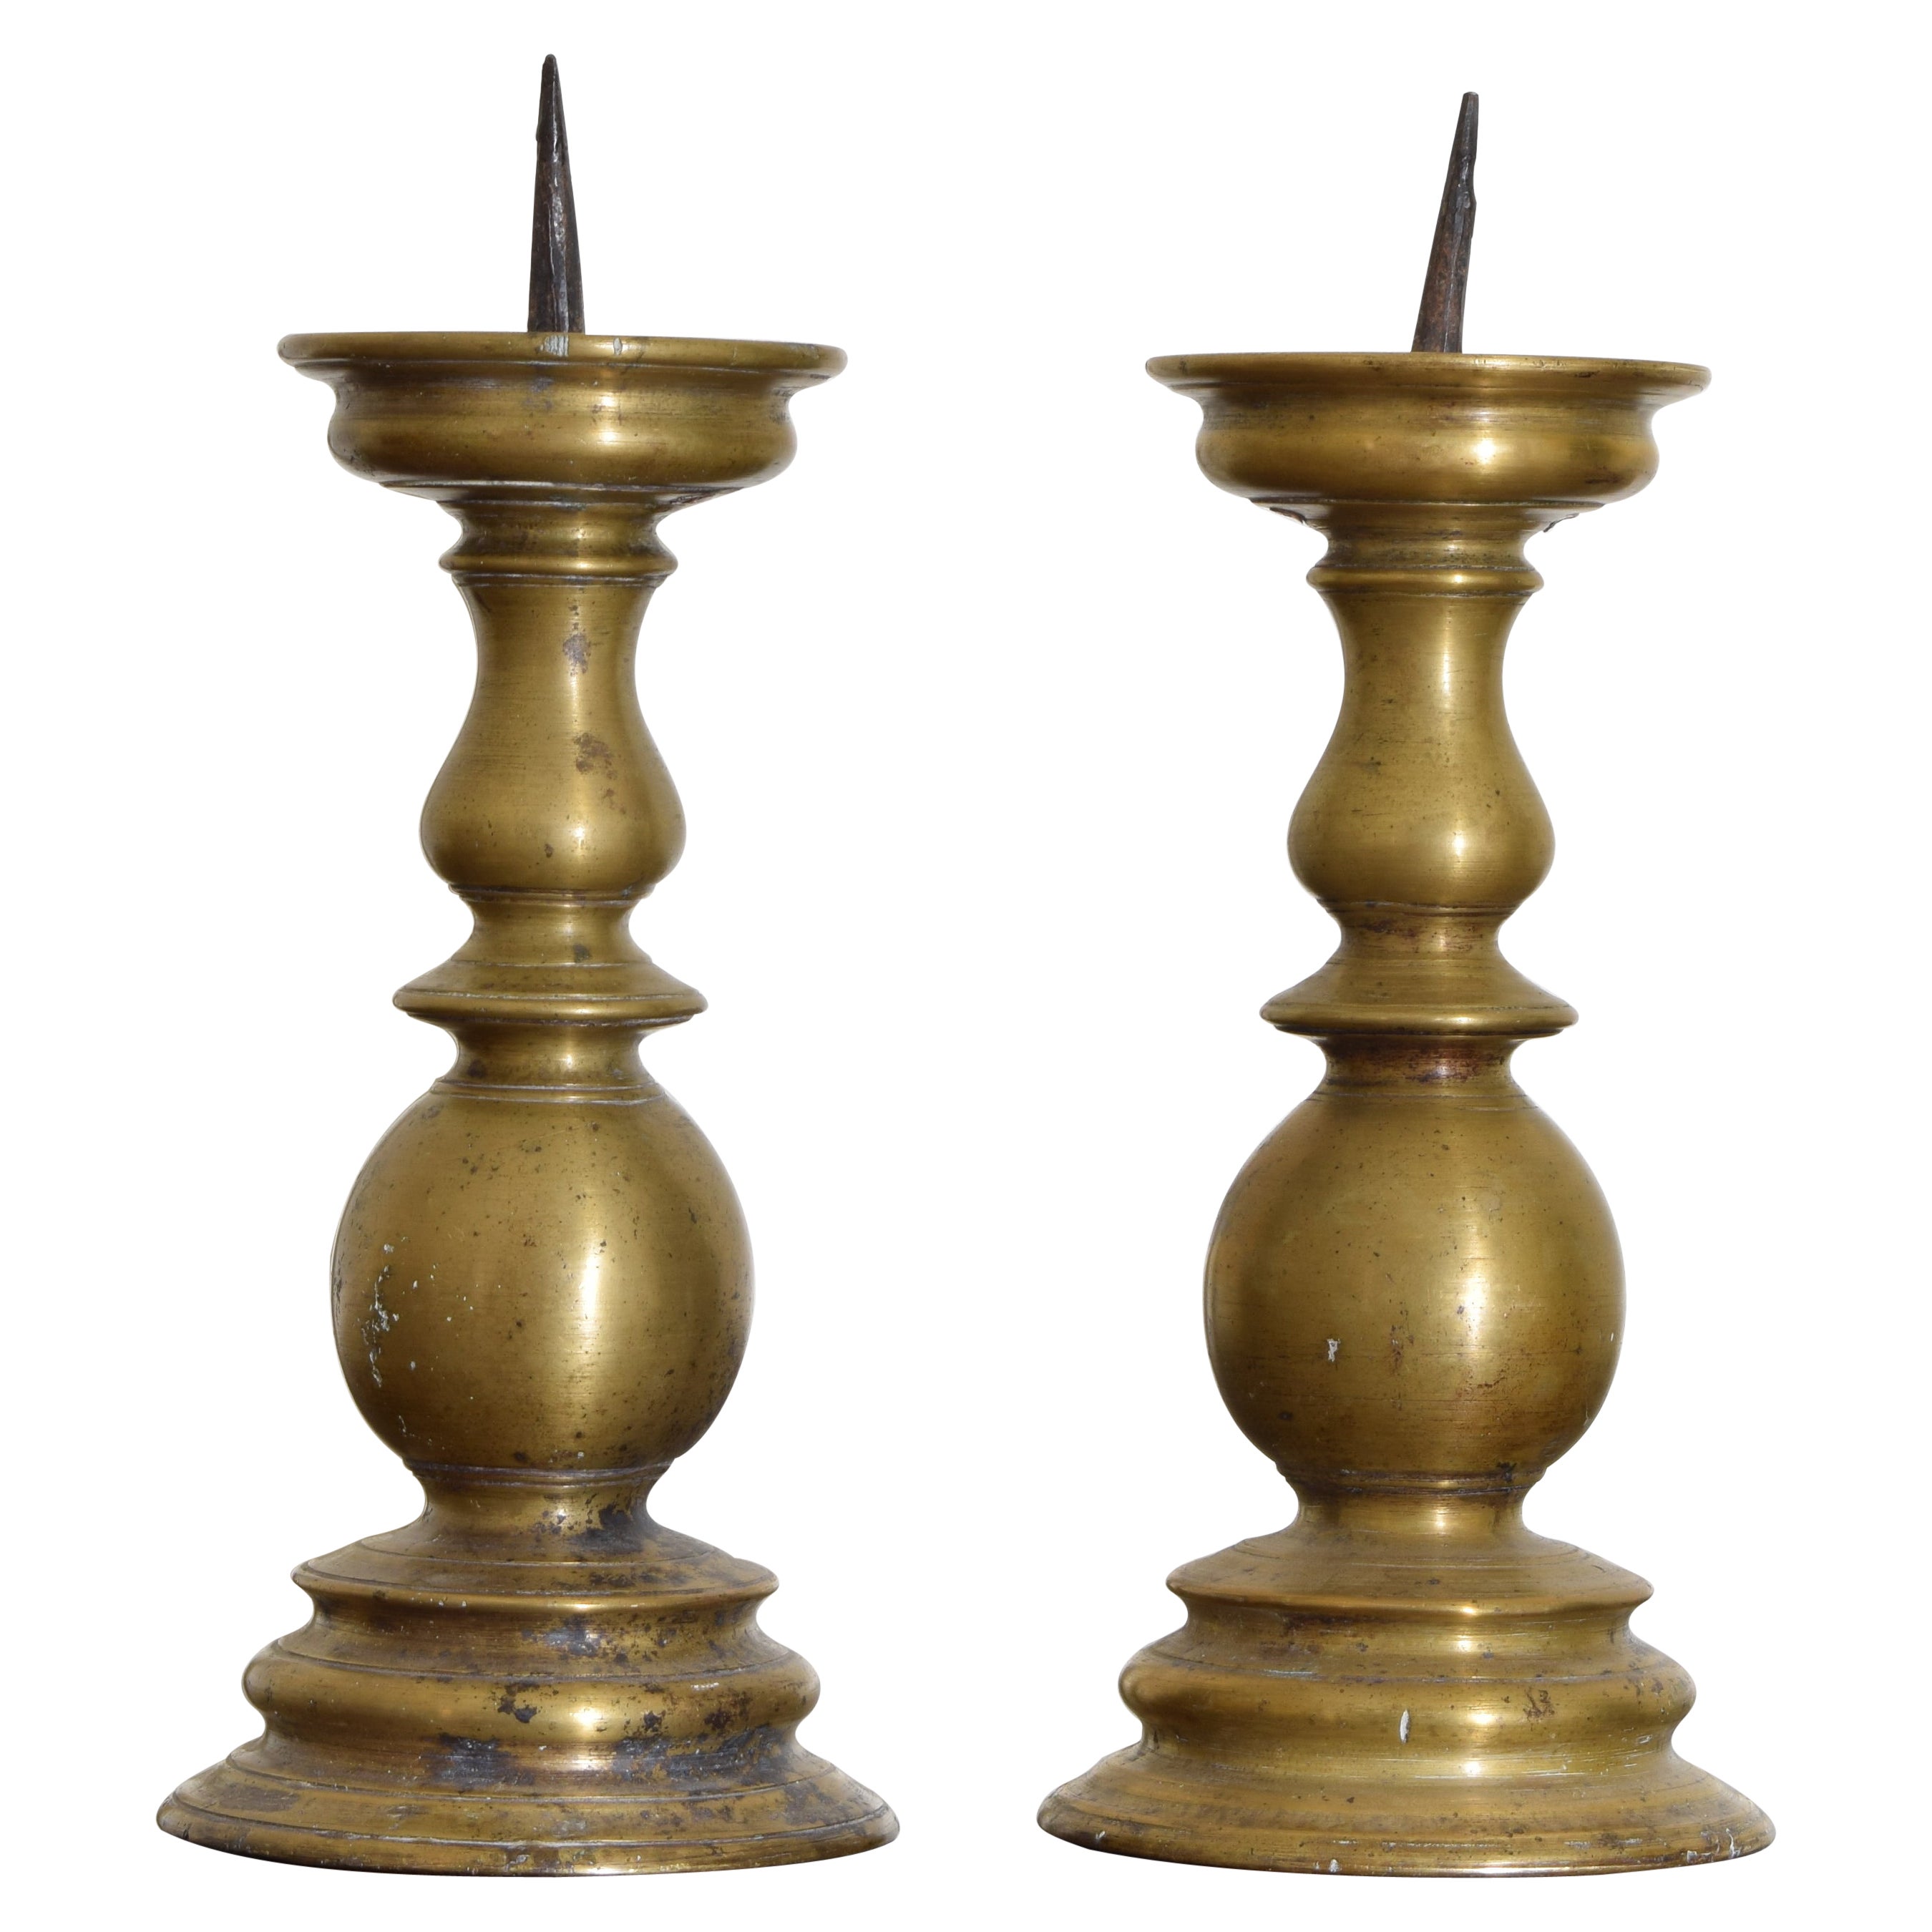 Pair of French Cast Bronze Louis XIII Period Candlesticks, 17th century For Sale